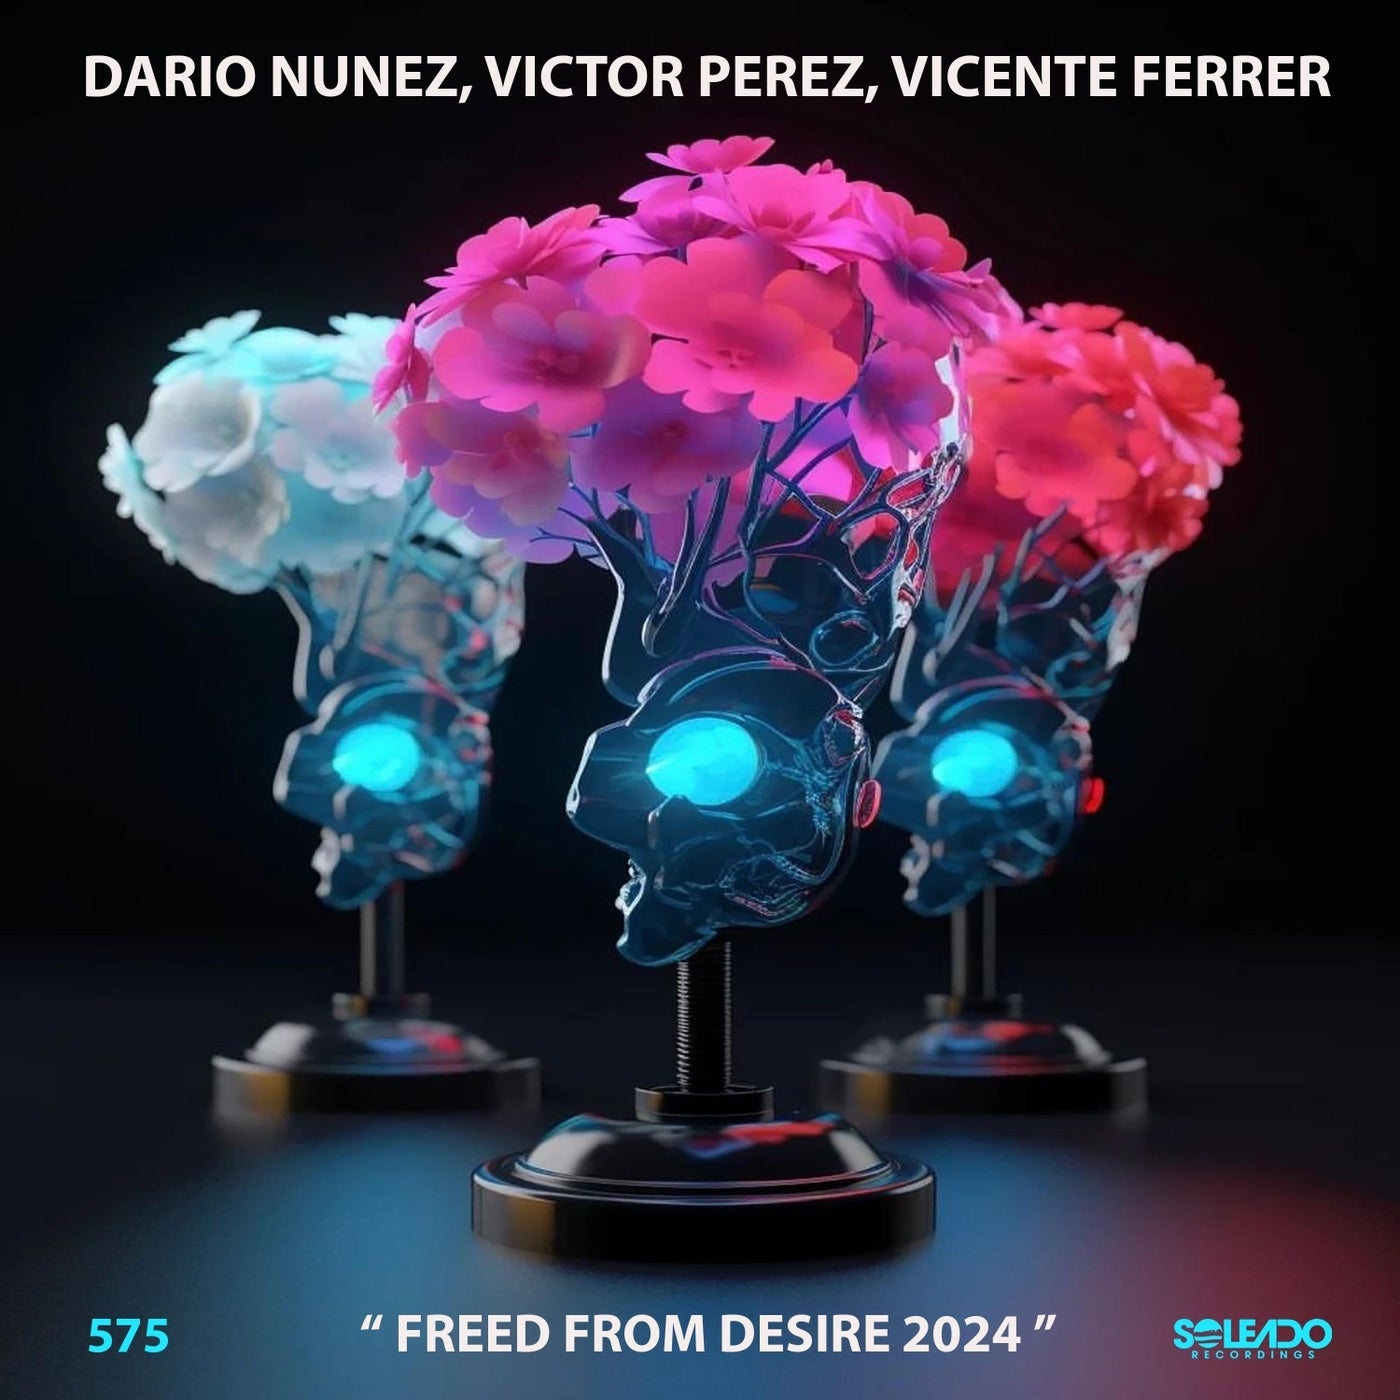 Release Cover: Freed from desire 2024 (original) Download Free on Electrobuzz